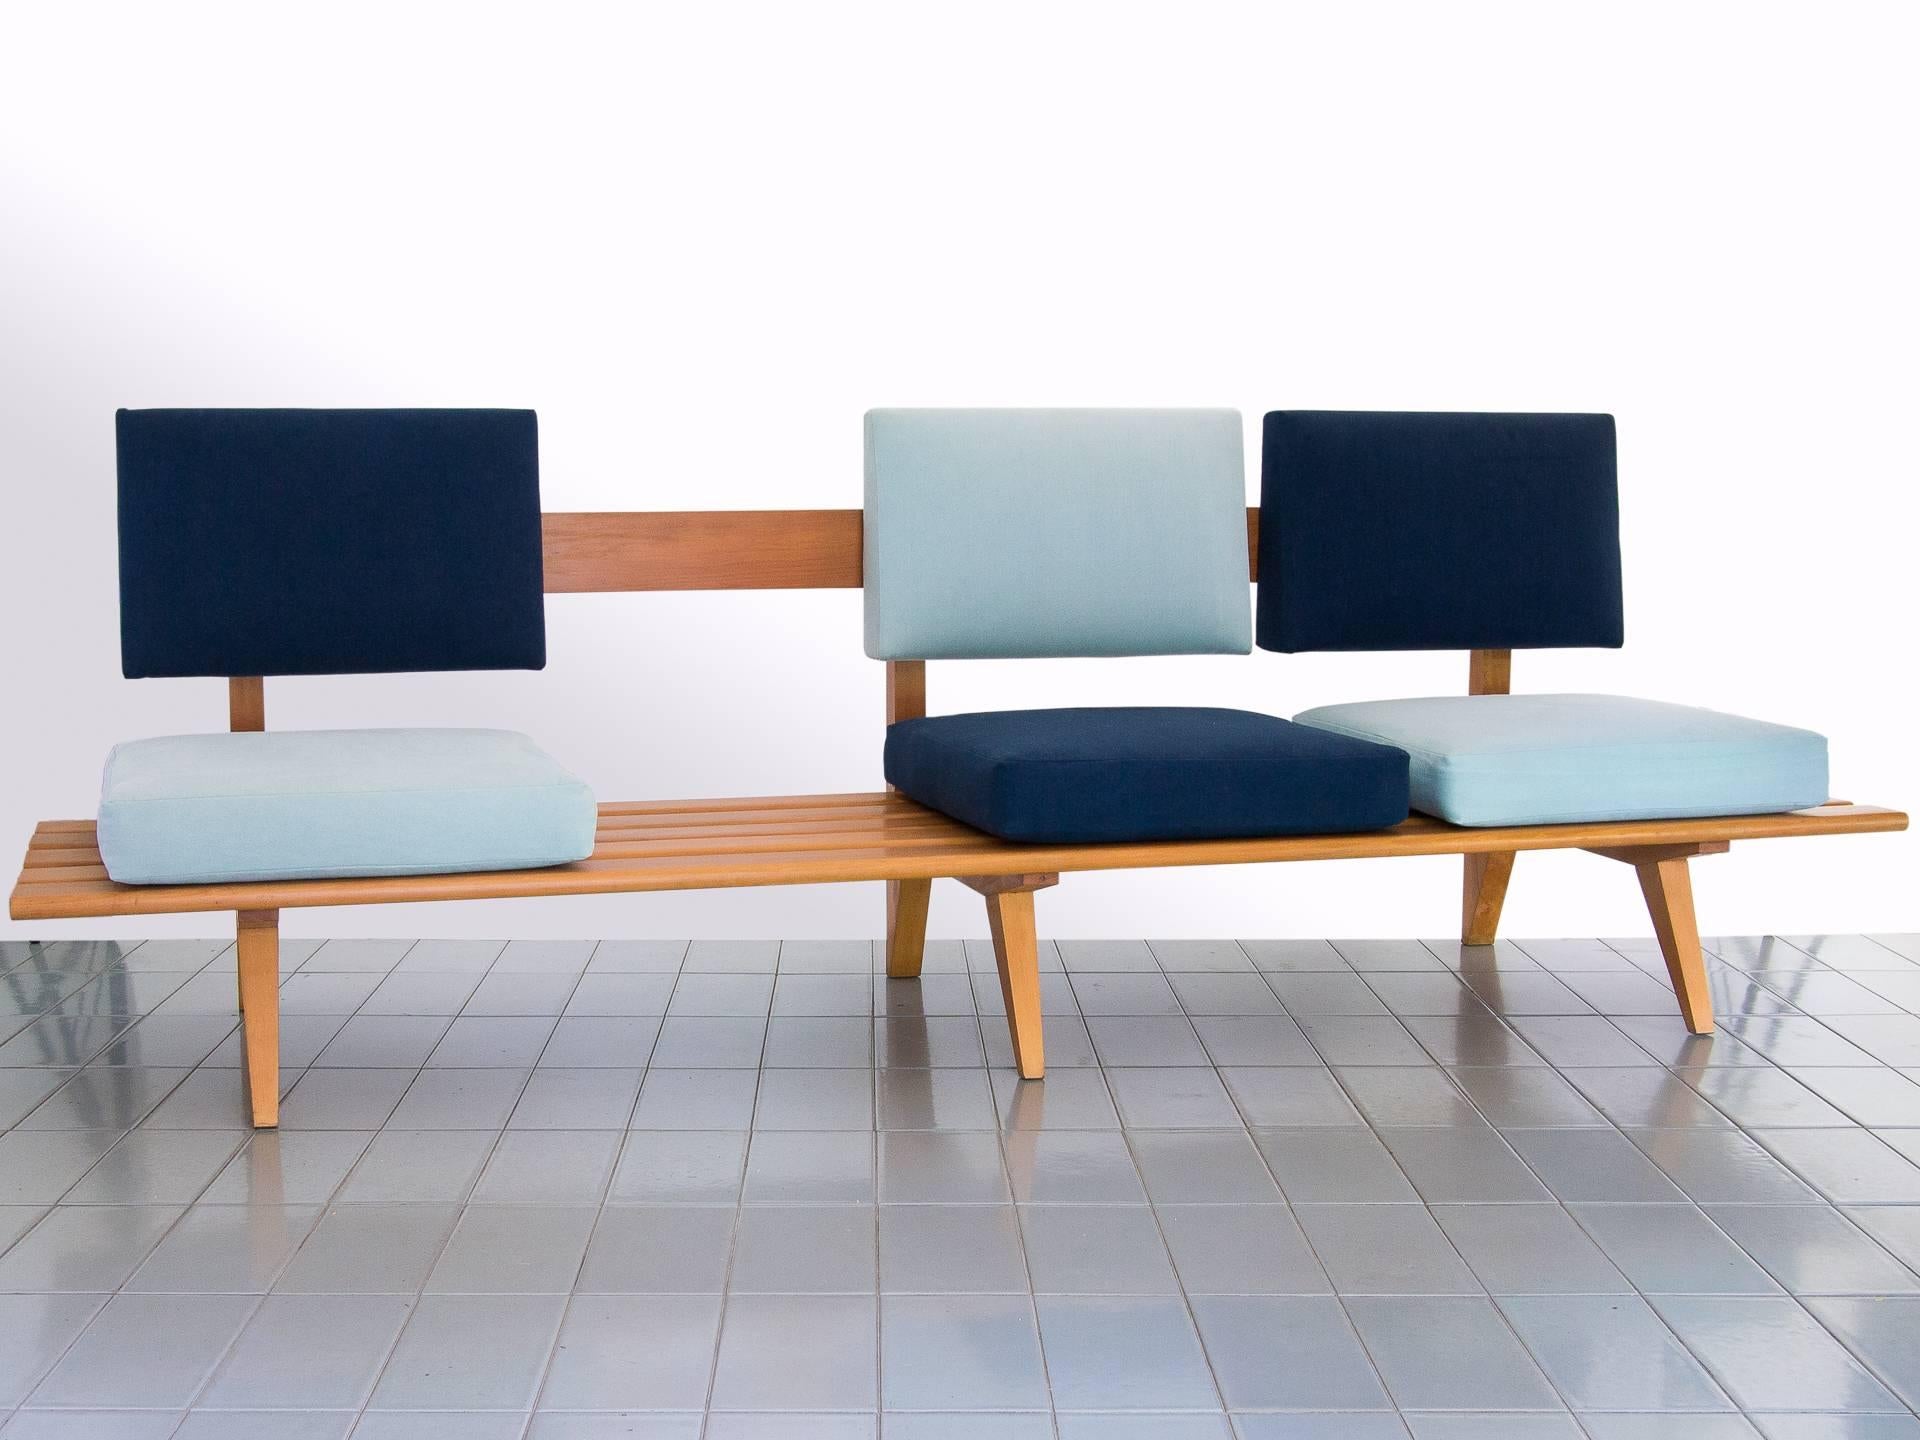 This exquisite and unique sofa is constructed in solid Pau Marfim wood, and has three seats distributed asymmetrically, leaving a gap in one side that can be used as a table. The two tones of blue are original to the piece, but we replaced the